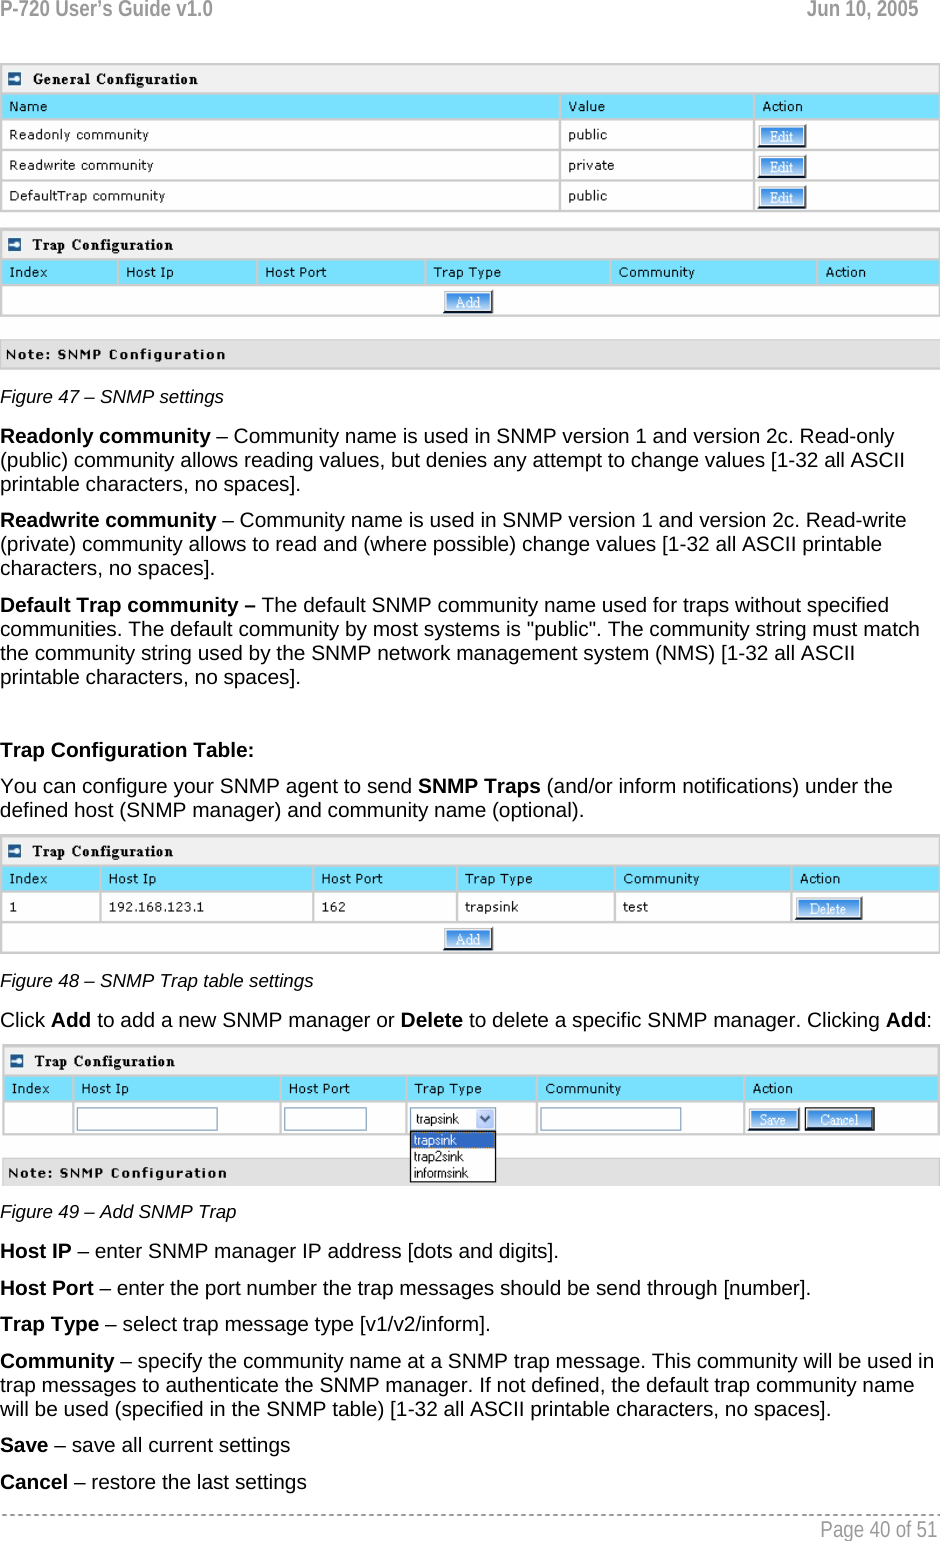 P-720 User’s Guide v1.0  Jun 10, 2005     Page 40 of 51    Figure 47 – SNMP settings Readonly community – Community name is used in SNMP version 1 and version 2c. Read-only (public) community allows reading values, but denies any attempt to change values [1-32 all ASCII printable characters, no spaces]. Readwrite community – Community name is used in SNMP version 1 and version 2c. Read-write (private) community allows to read and (where possible) change values [1-32 all ASCII printable characters, no spaces]. Default Trap community – The default SNMP community name used for traps without specified communities. The default community by most systems is &quot;public&quot;. The community string must match the community string used by the SNMP network management system (NMS) [1-32 all ASCII printable characters, no spaces].  Trap Configuration Table: You can configure your SNMP agent to send SNMP Traps (and/or inform notifications) under the defined host (SNMP manager) and community name (optional).  Figure 48 – SNMP Trap table settings Click Add to add a new SNMP manager or Delete to delete a specific SNMP manager. Clicking Add:  Figure 49 – Add SNMP Trap Host IP – enter SNMP manager IP address [dots and digits]. Host Port – enter the port number the trap messages should be send through [number]. Trap Type – select trap message type [v1/v2/inform]. Community – specify the community name at a SNMP trap message. This community will be used in trap messages to authenticate the SNMP manager. If not defined, the default trap community name will be used (specified in the SNMP table) [1-32 all ASCII printable characters, no spaces]. Save – save all current settings Cancel – restore the last settings 